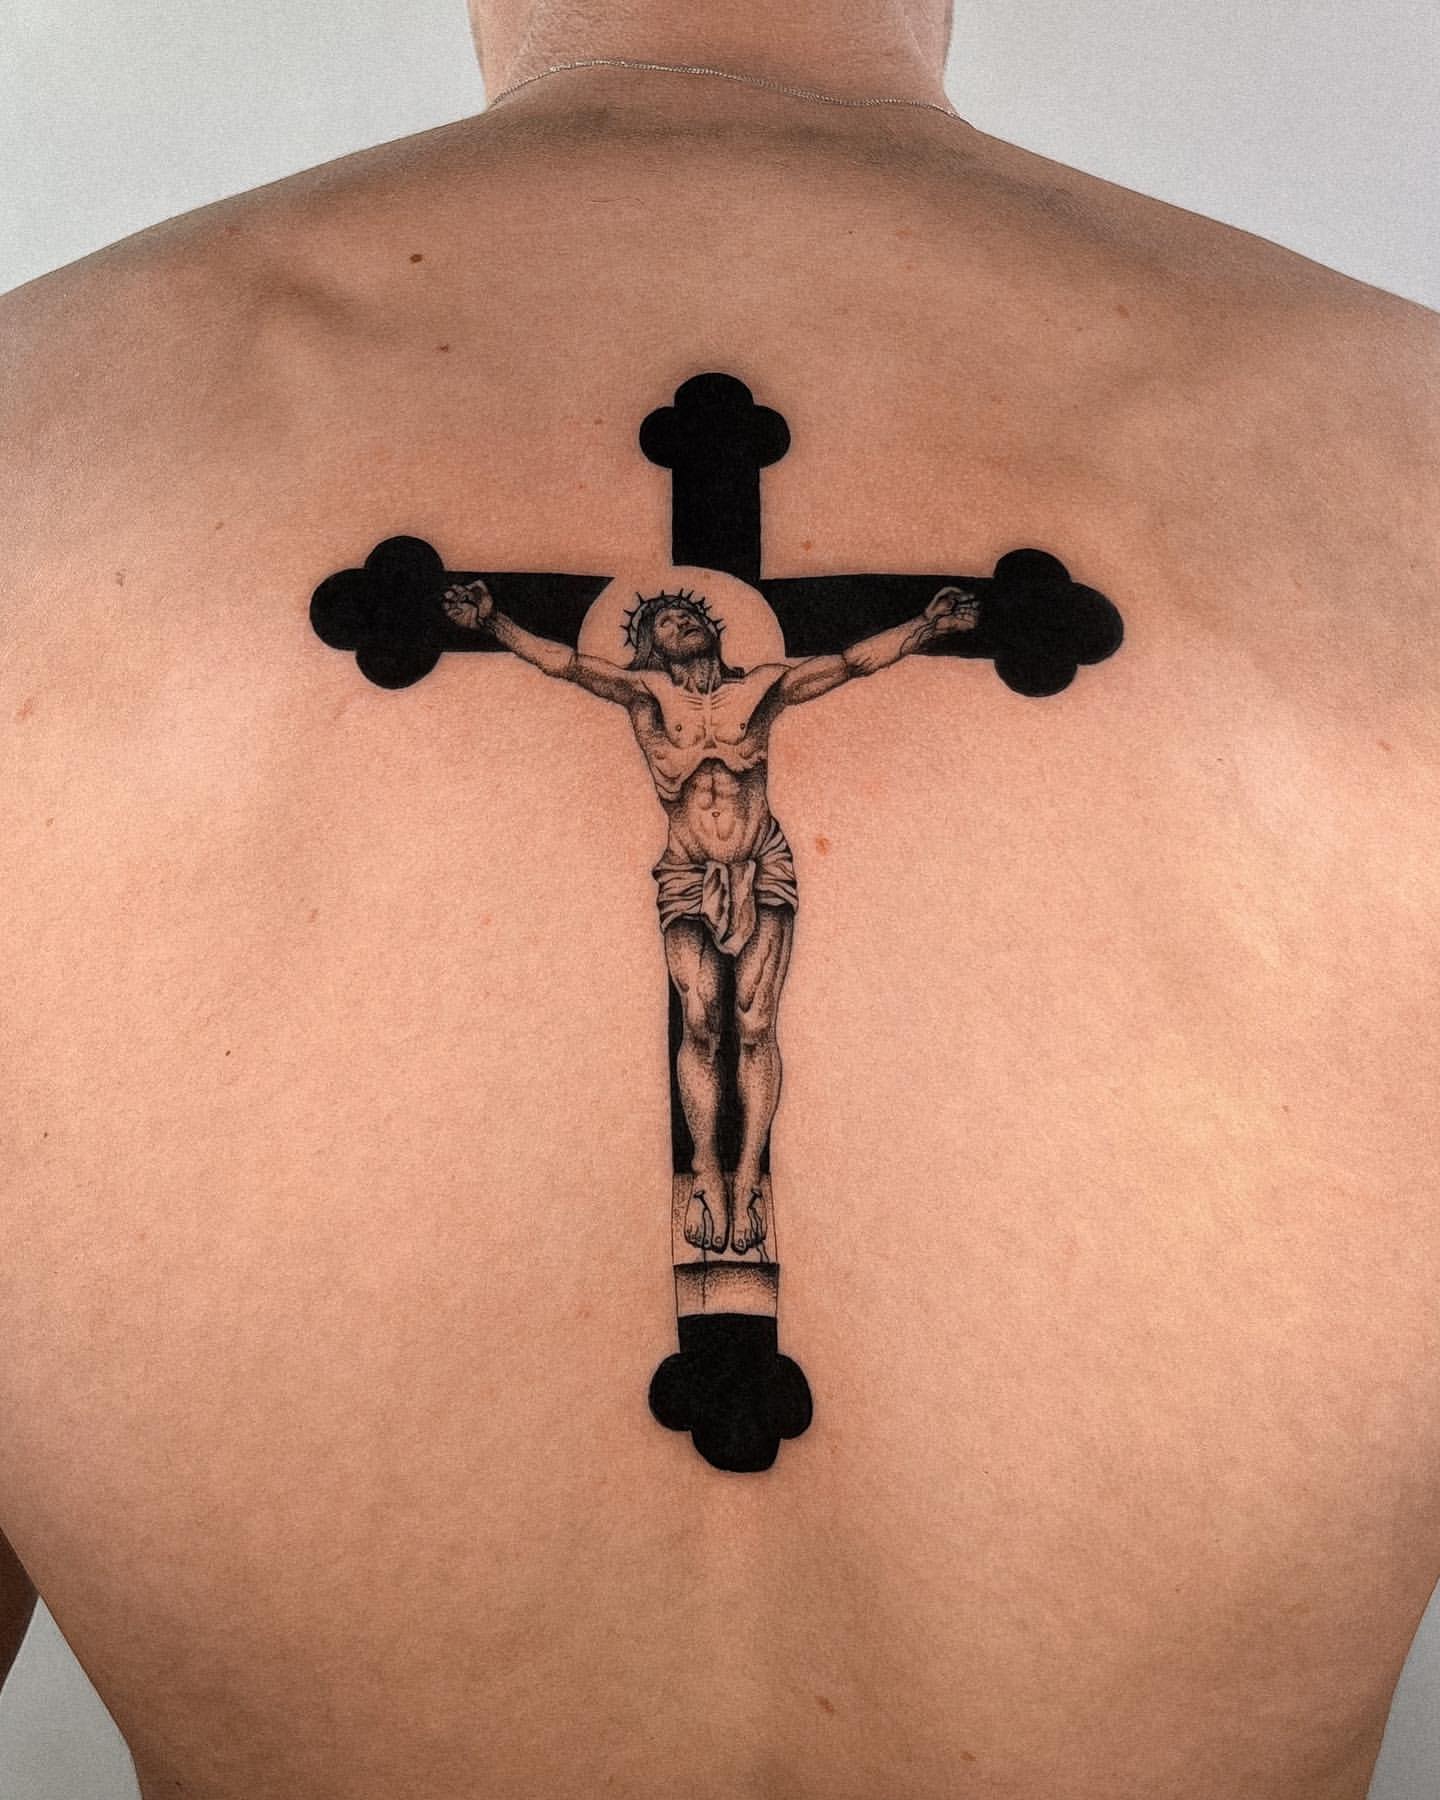 Realistic Black Cross Temporary Cross Tattoos For Men Set Of 5 With Wings,  Feathers, Thorn, And Crown Waterproof Arm And Back Stickers Z0403 From  Misihan09, $3.8 | DHgate.Com